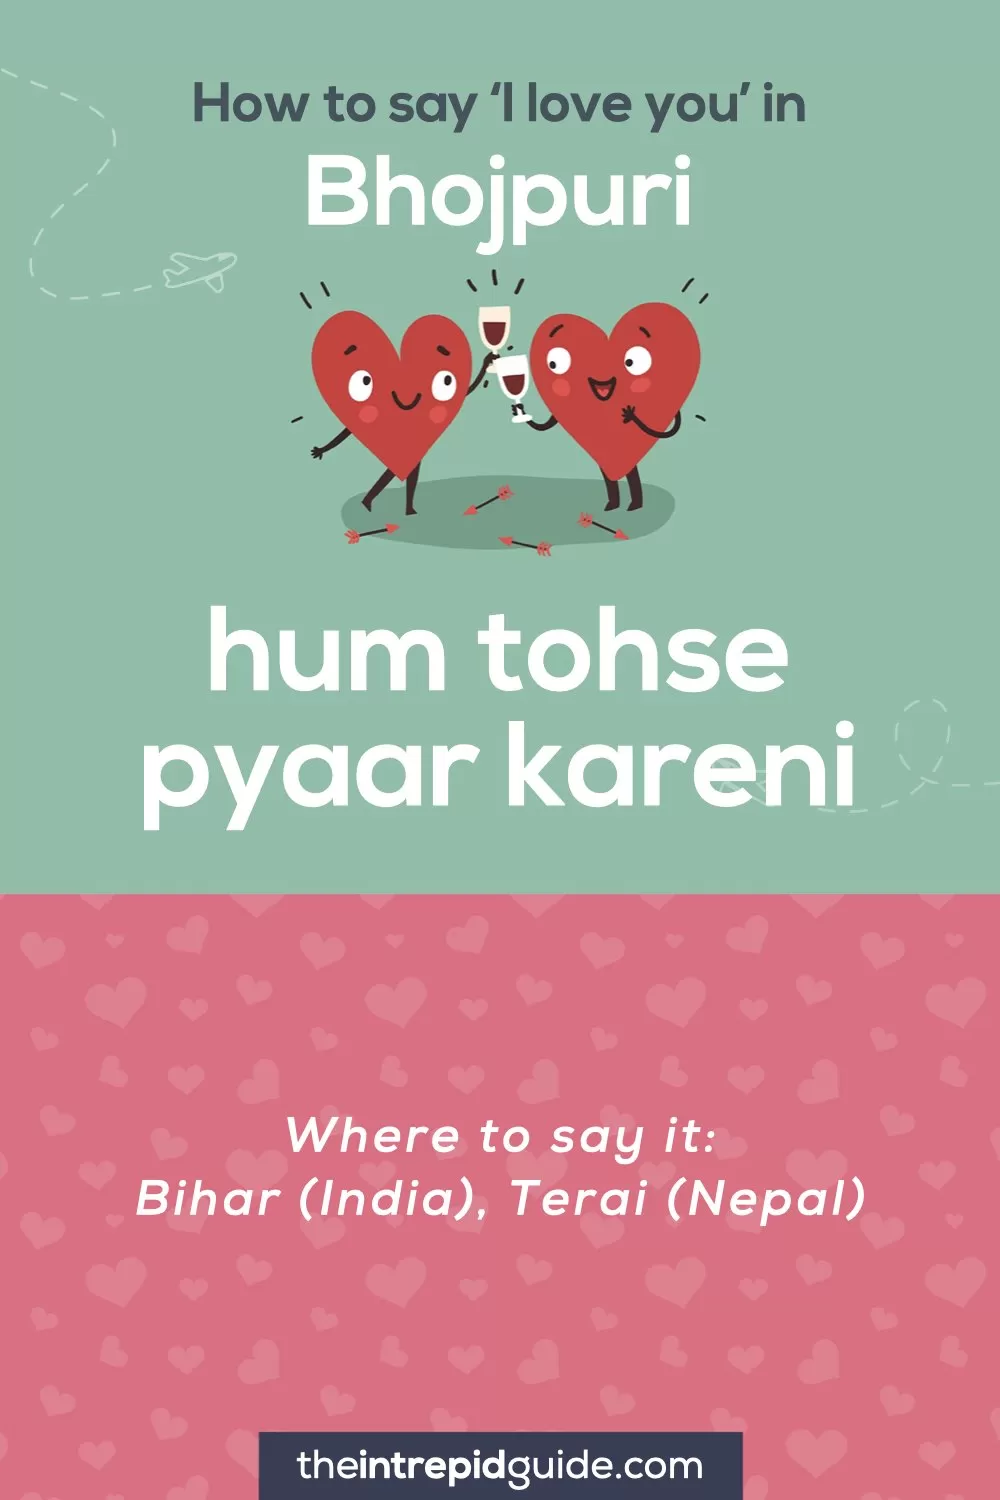 How to say I love you in different languages - Bhojpuri - hum tohse pyaar kareni